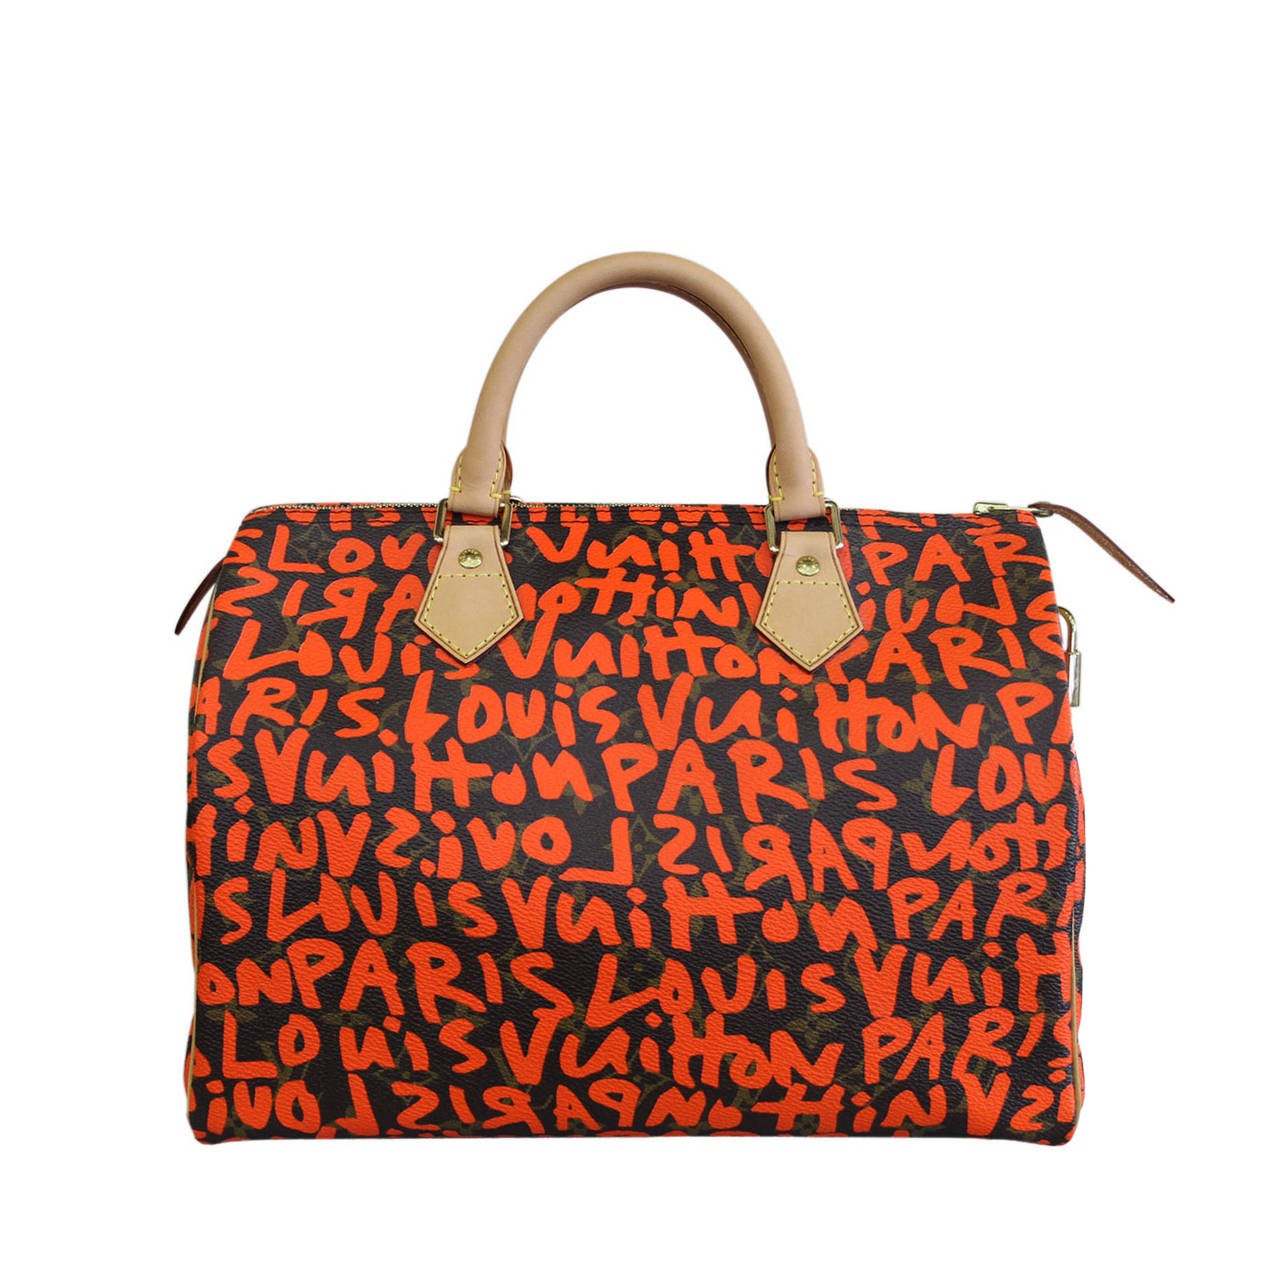 Louis Vuitton Graffiti Stephen Sprouse Speedy 30 Limited Edition Bag at 1stdibs